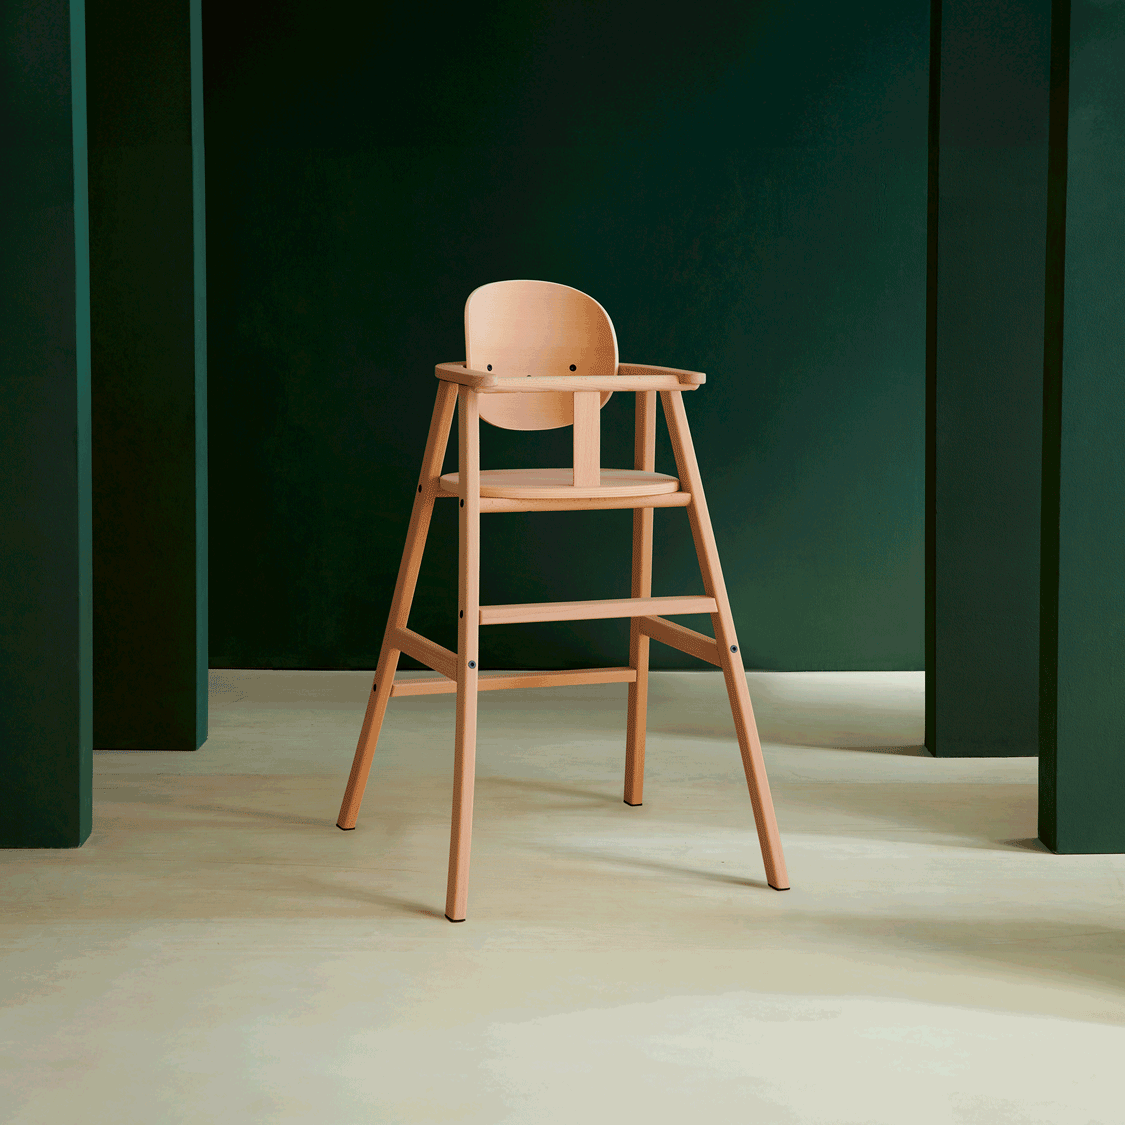 Nobodinoz Growing Green High Chair: 1 product, 2 chairs, 3 positions